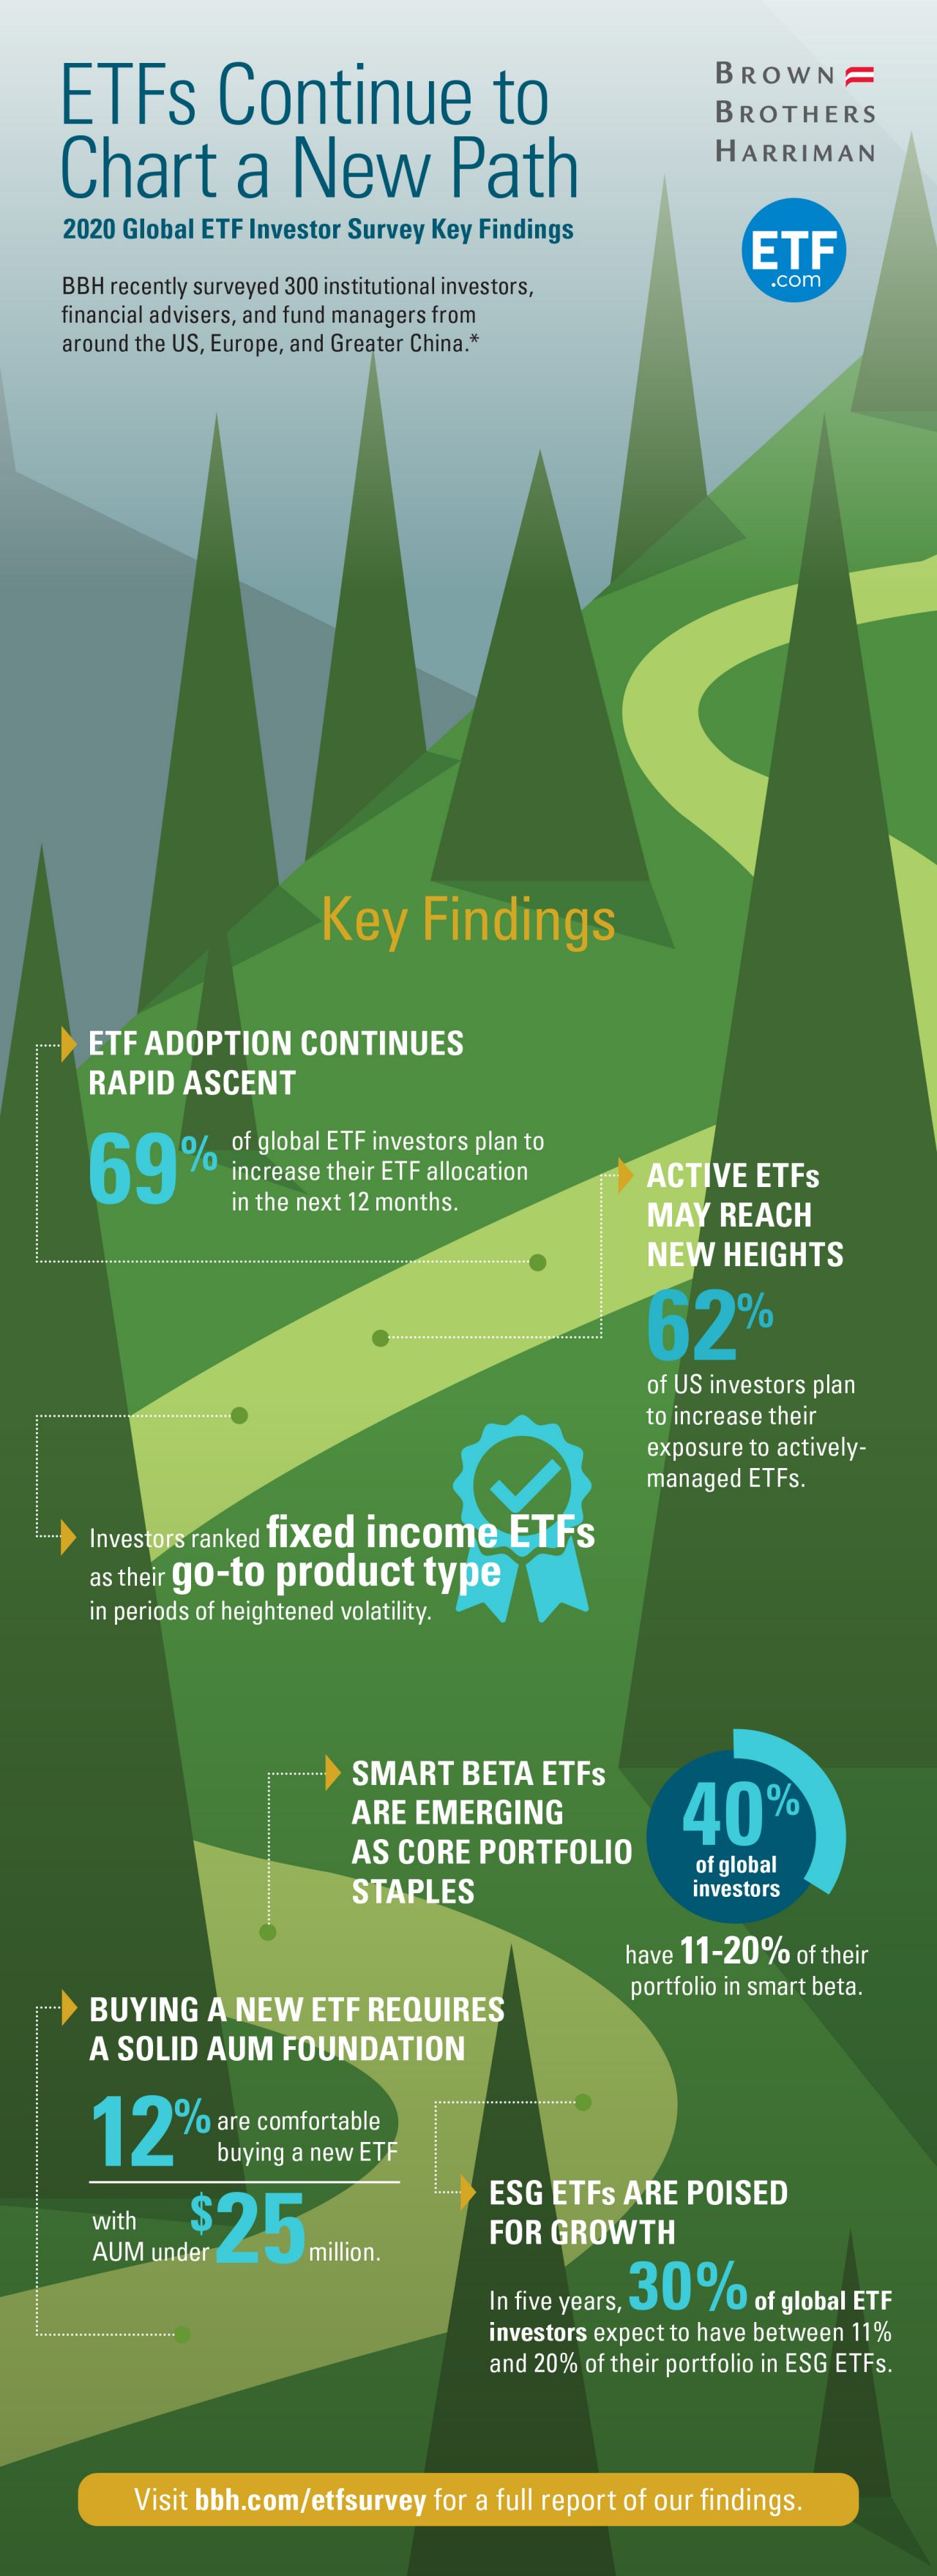 This infographic, based on BBH’s 2020 Global ETF Investor Survey, represents the key findings that ETFs continue to